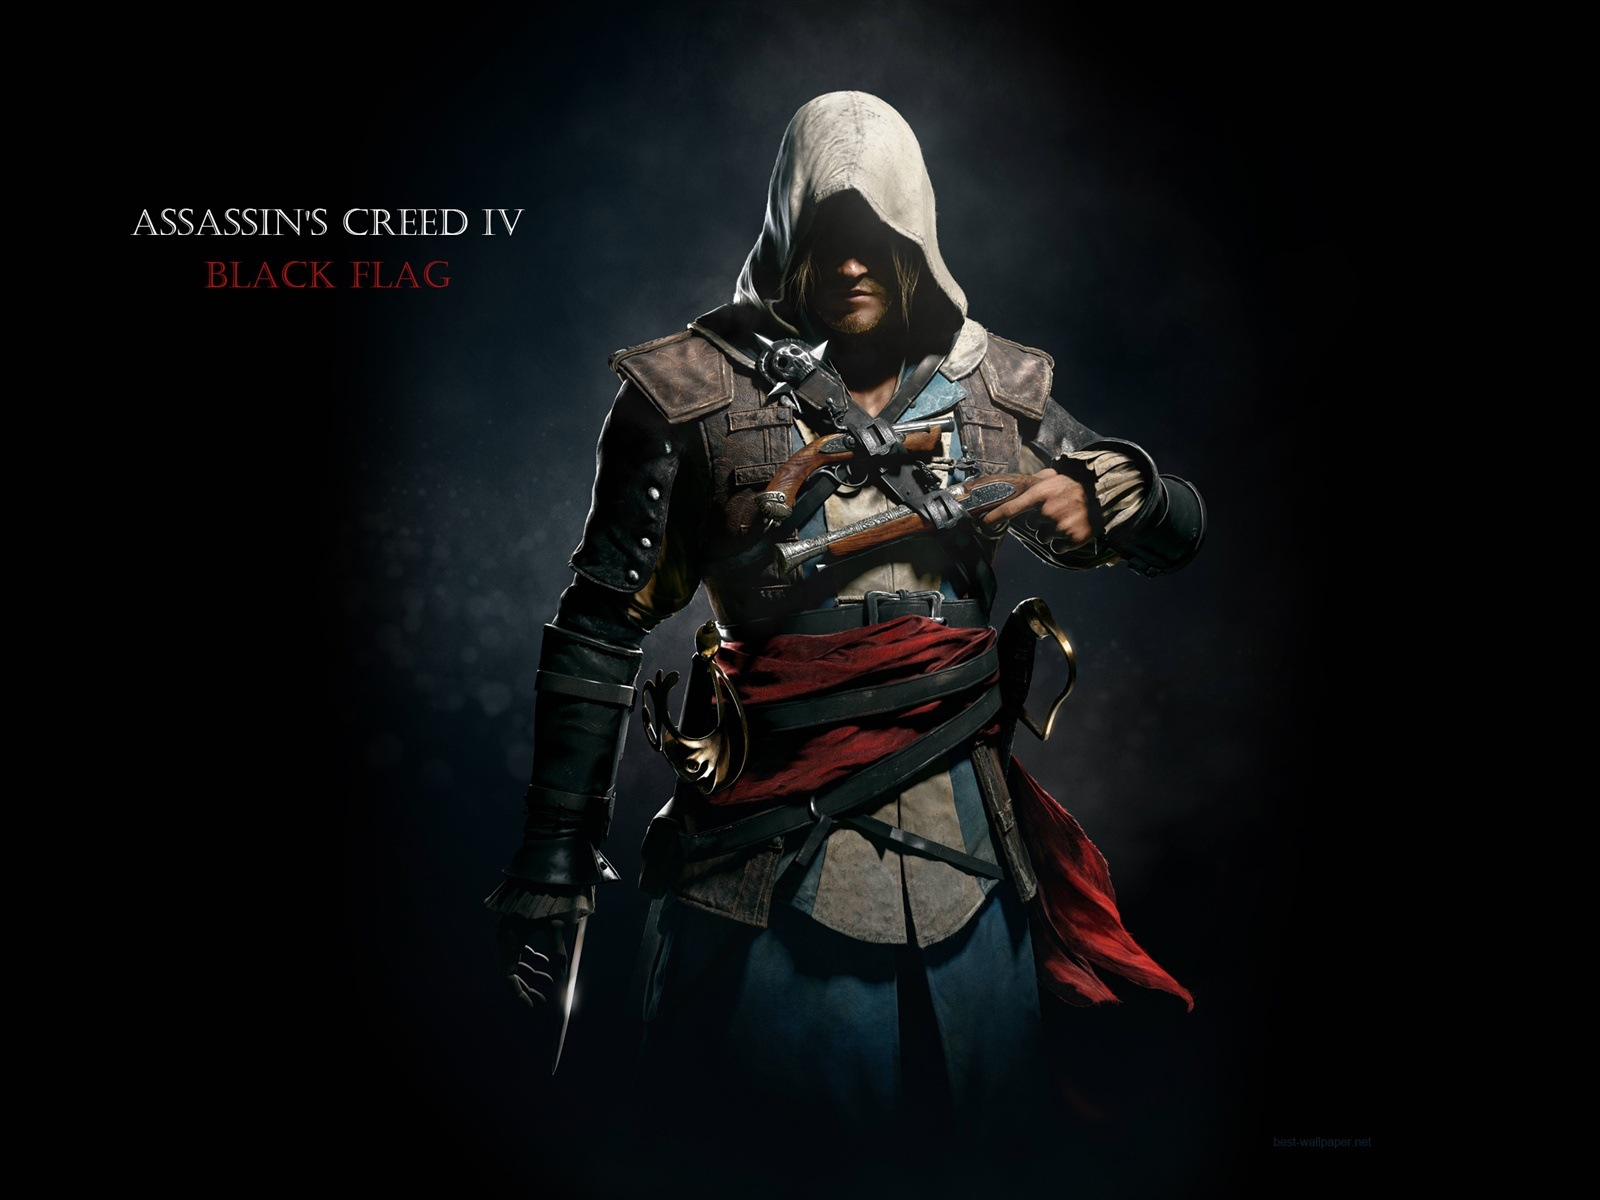 Creed IV Assassin: Black Flag HD wallpapers #9 - 1600x1200